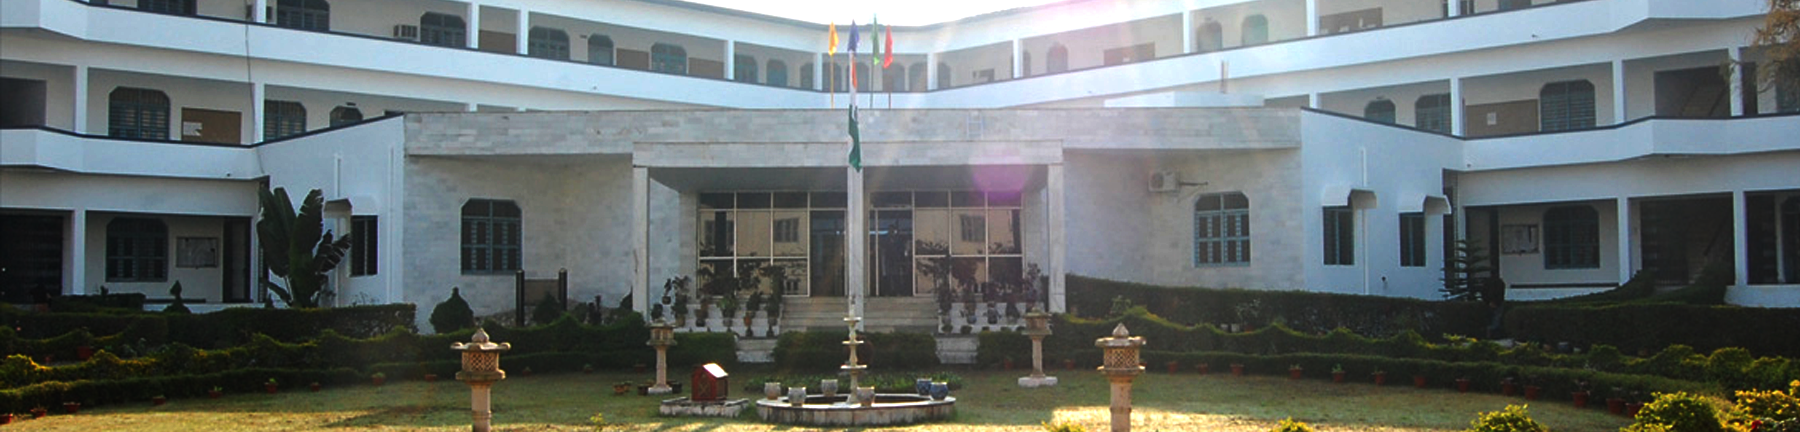 Amrapali Institute of Management and Computer Applications, Haldwani Image